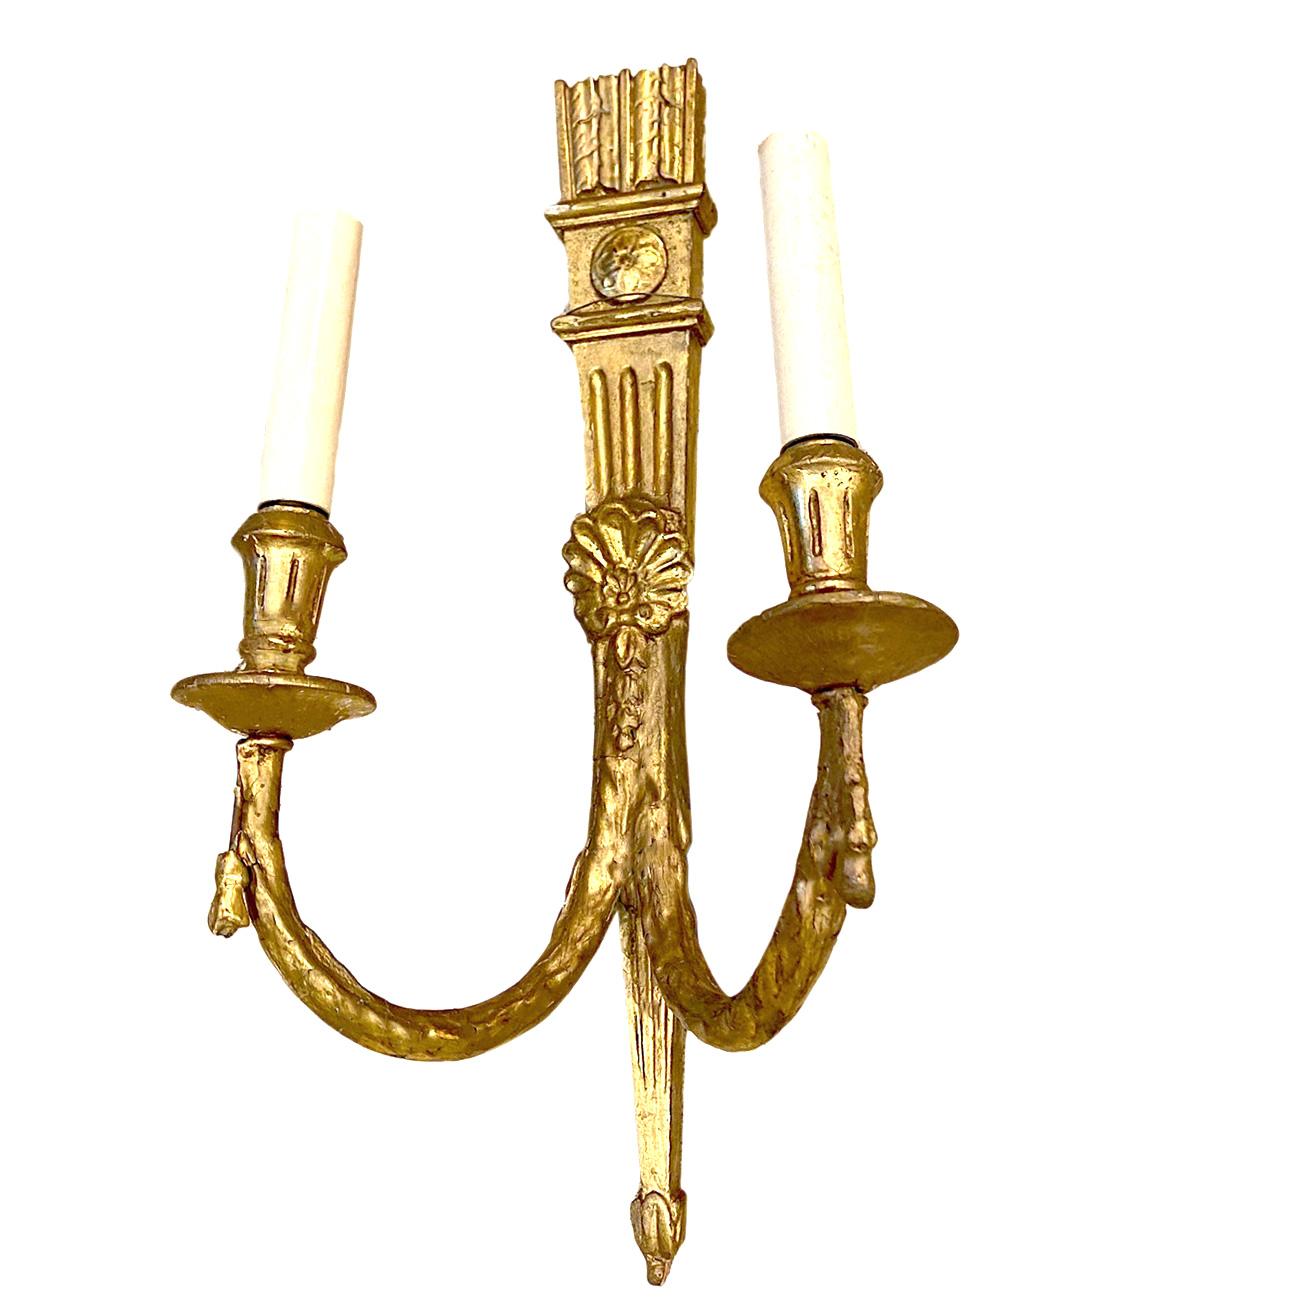 Antique French Giltwood Sconces In Good Condition For Sale In New York, NY